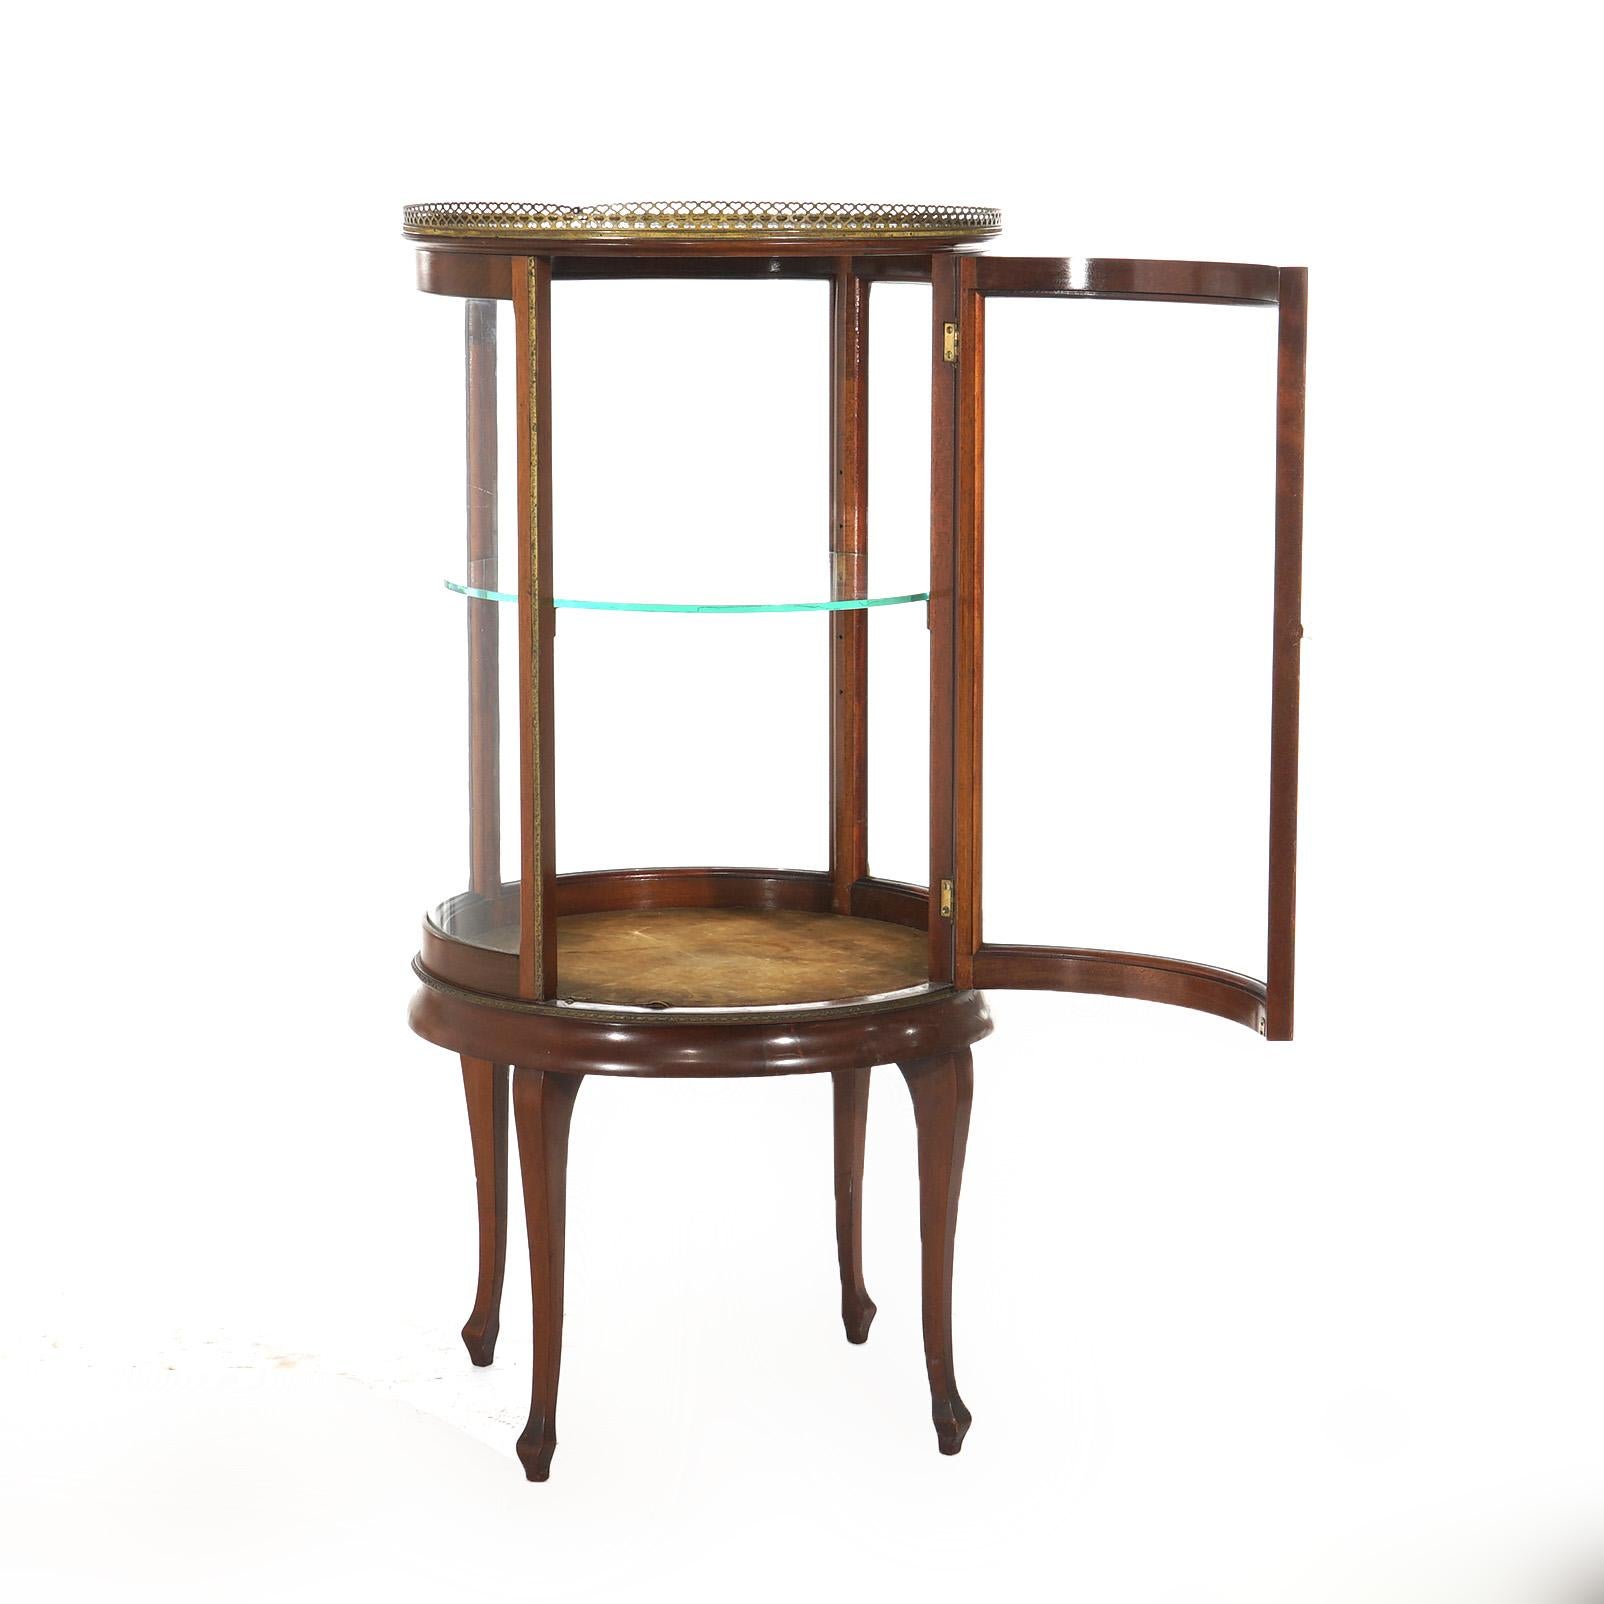 ***Ask About Reduced In-House Shipping Rates - Reliable Service & Fully Insured***
An antique French style circular display vitrine offers mahogany construction with pierced upper gallery over bent glass case having single door opening to shelved